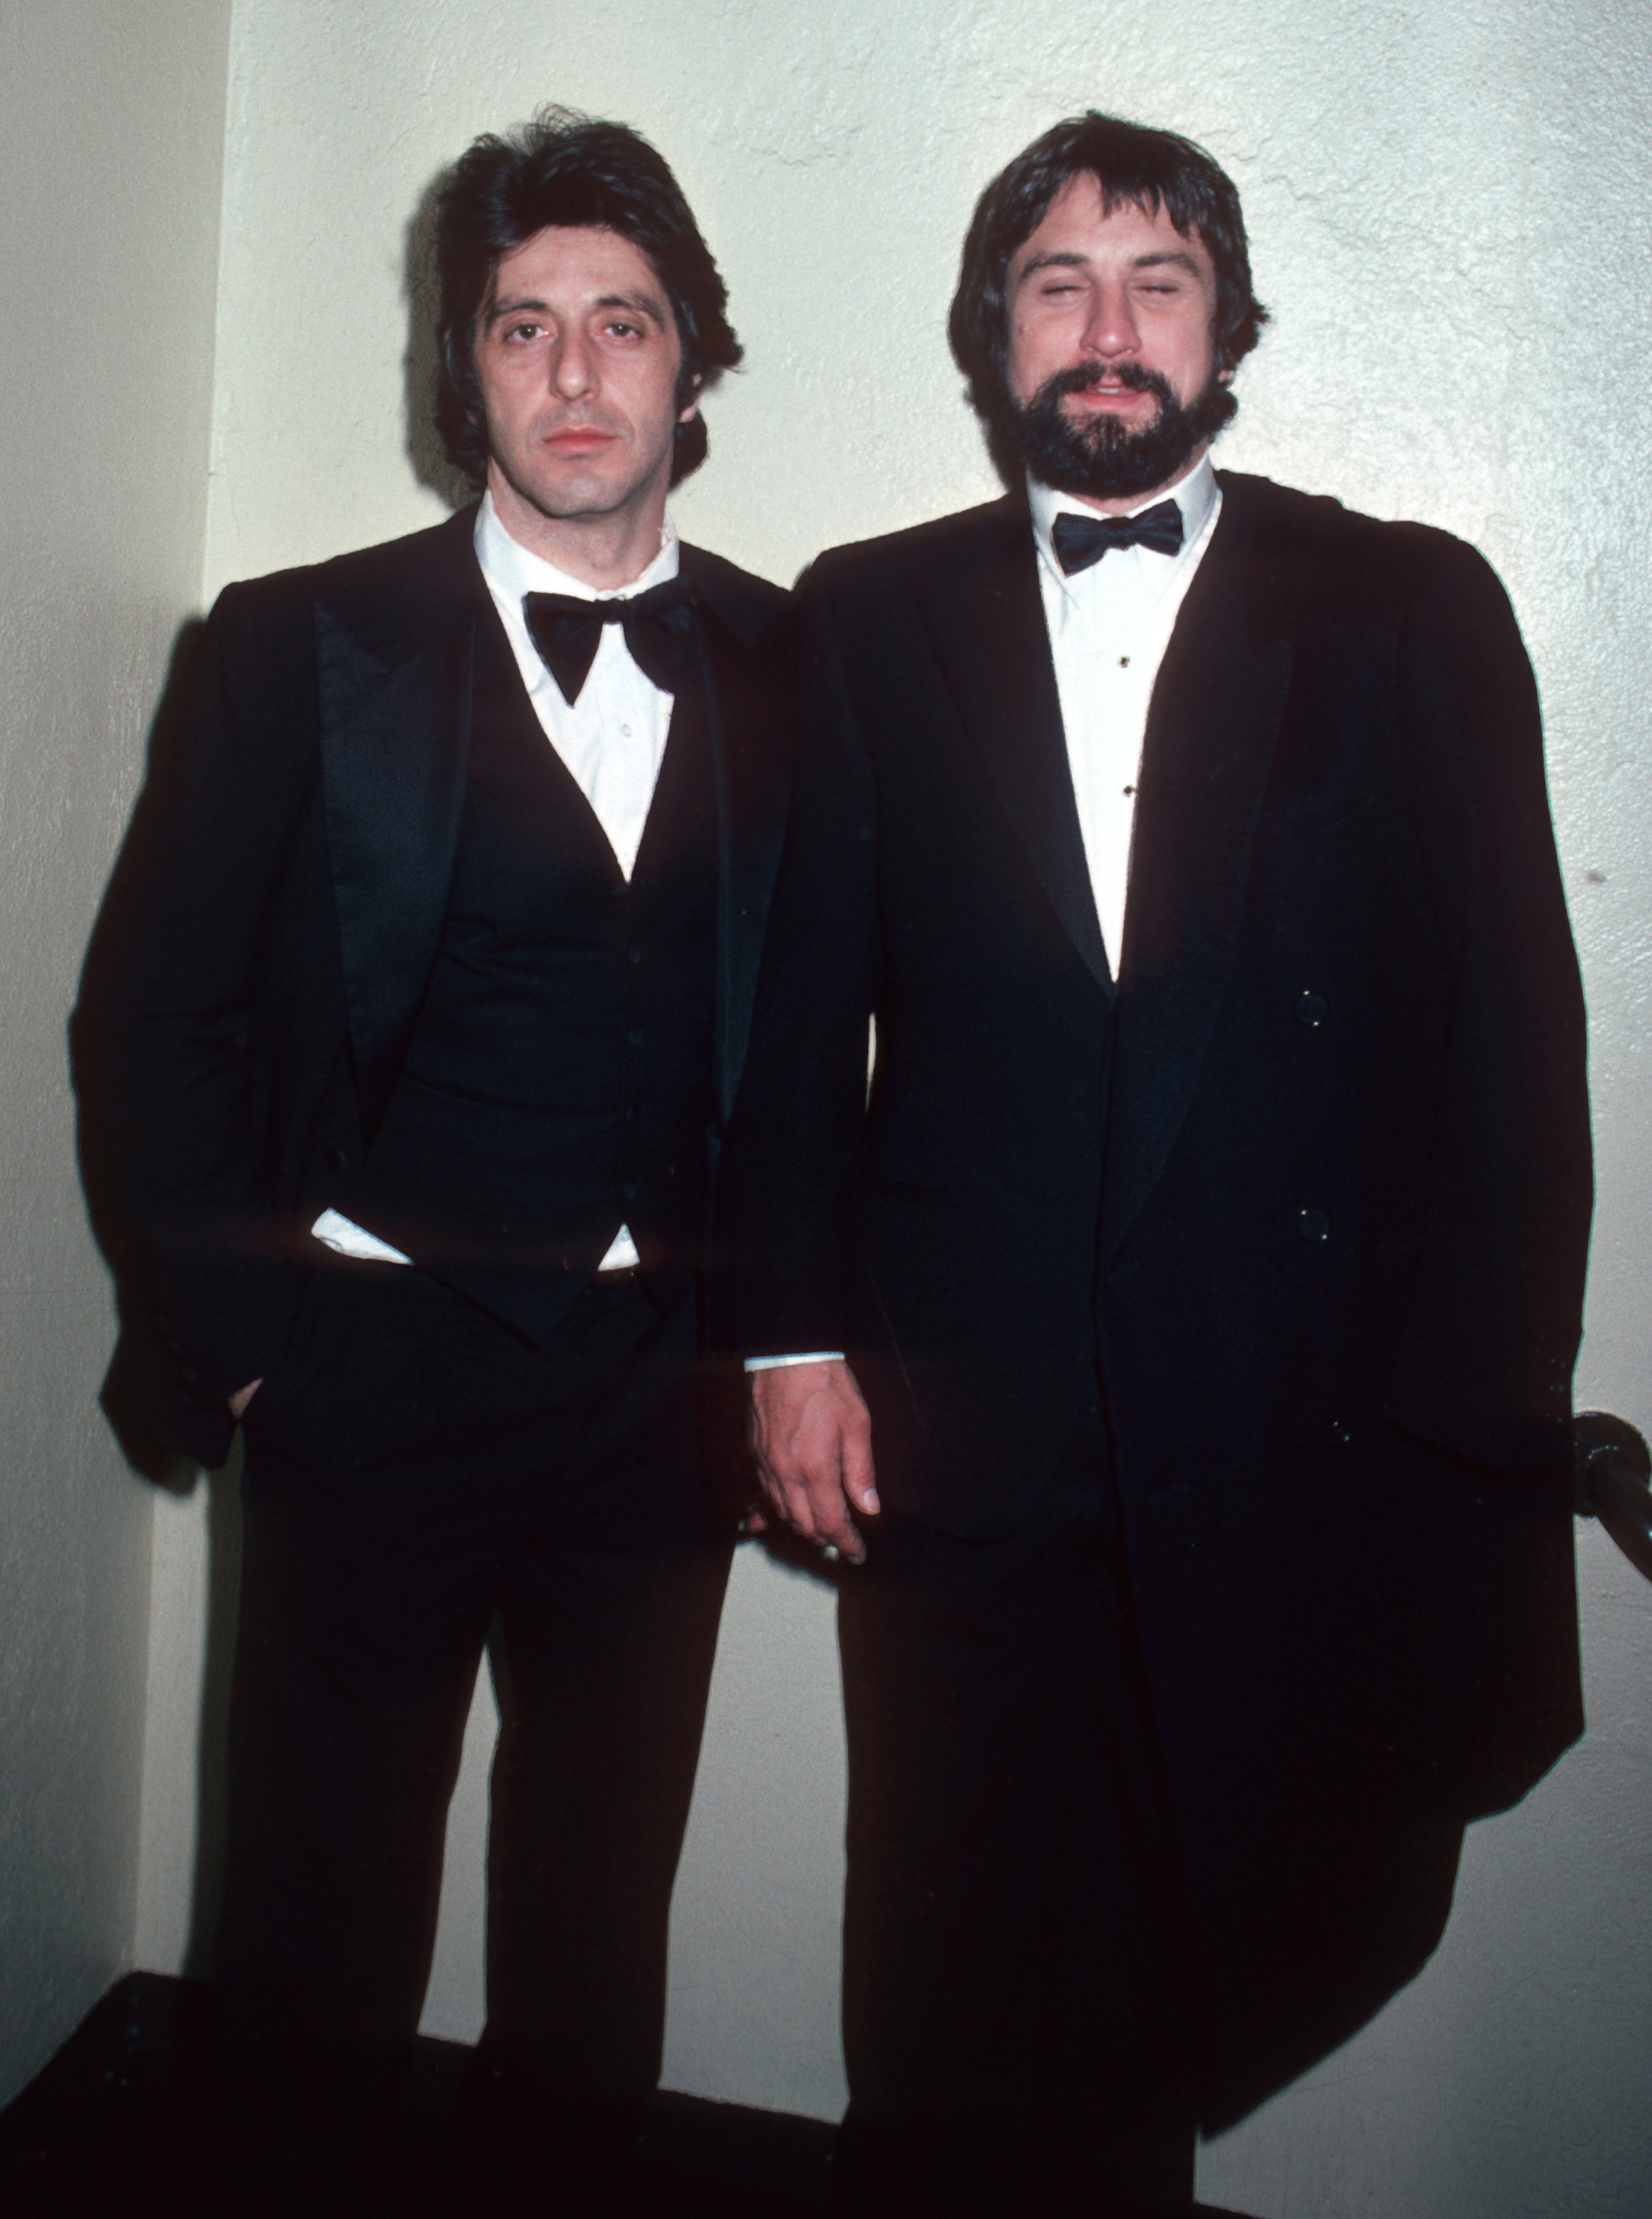 Pacino and De Niro in their younger days, both wearing bow ties